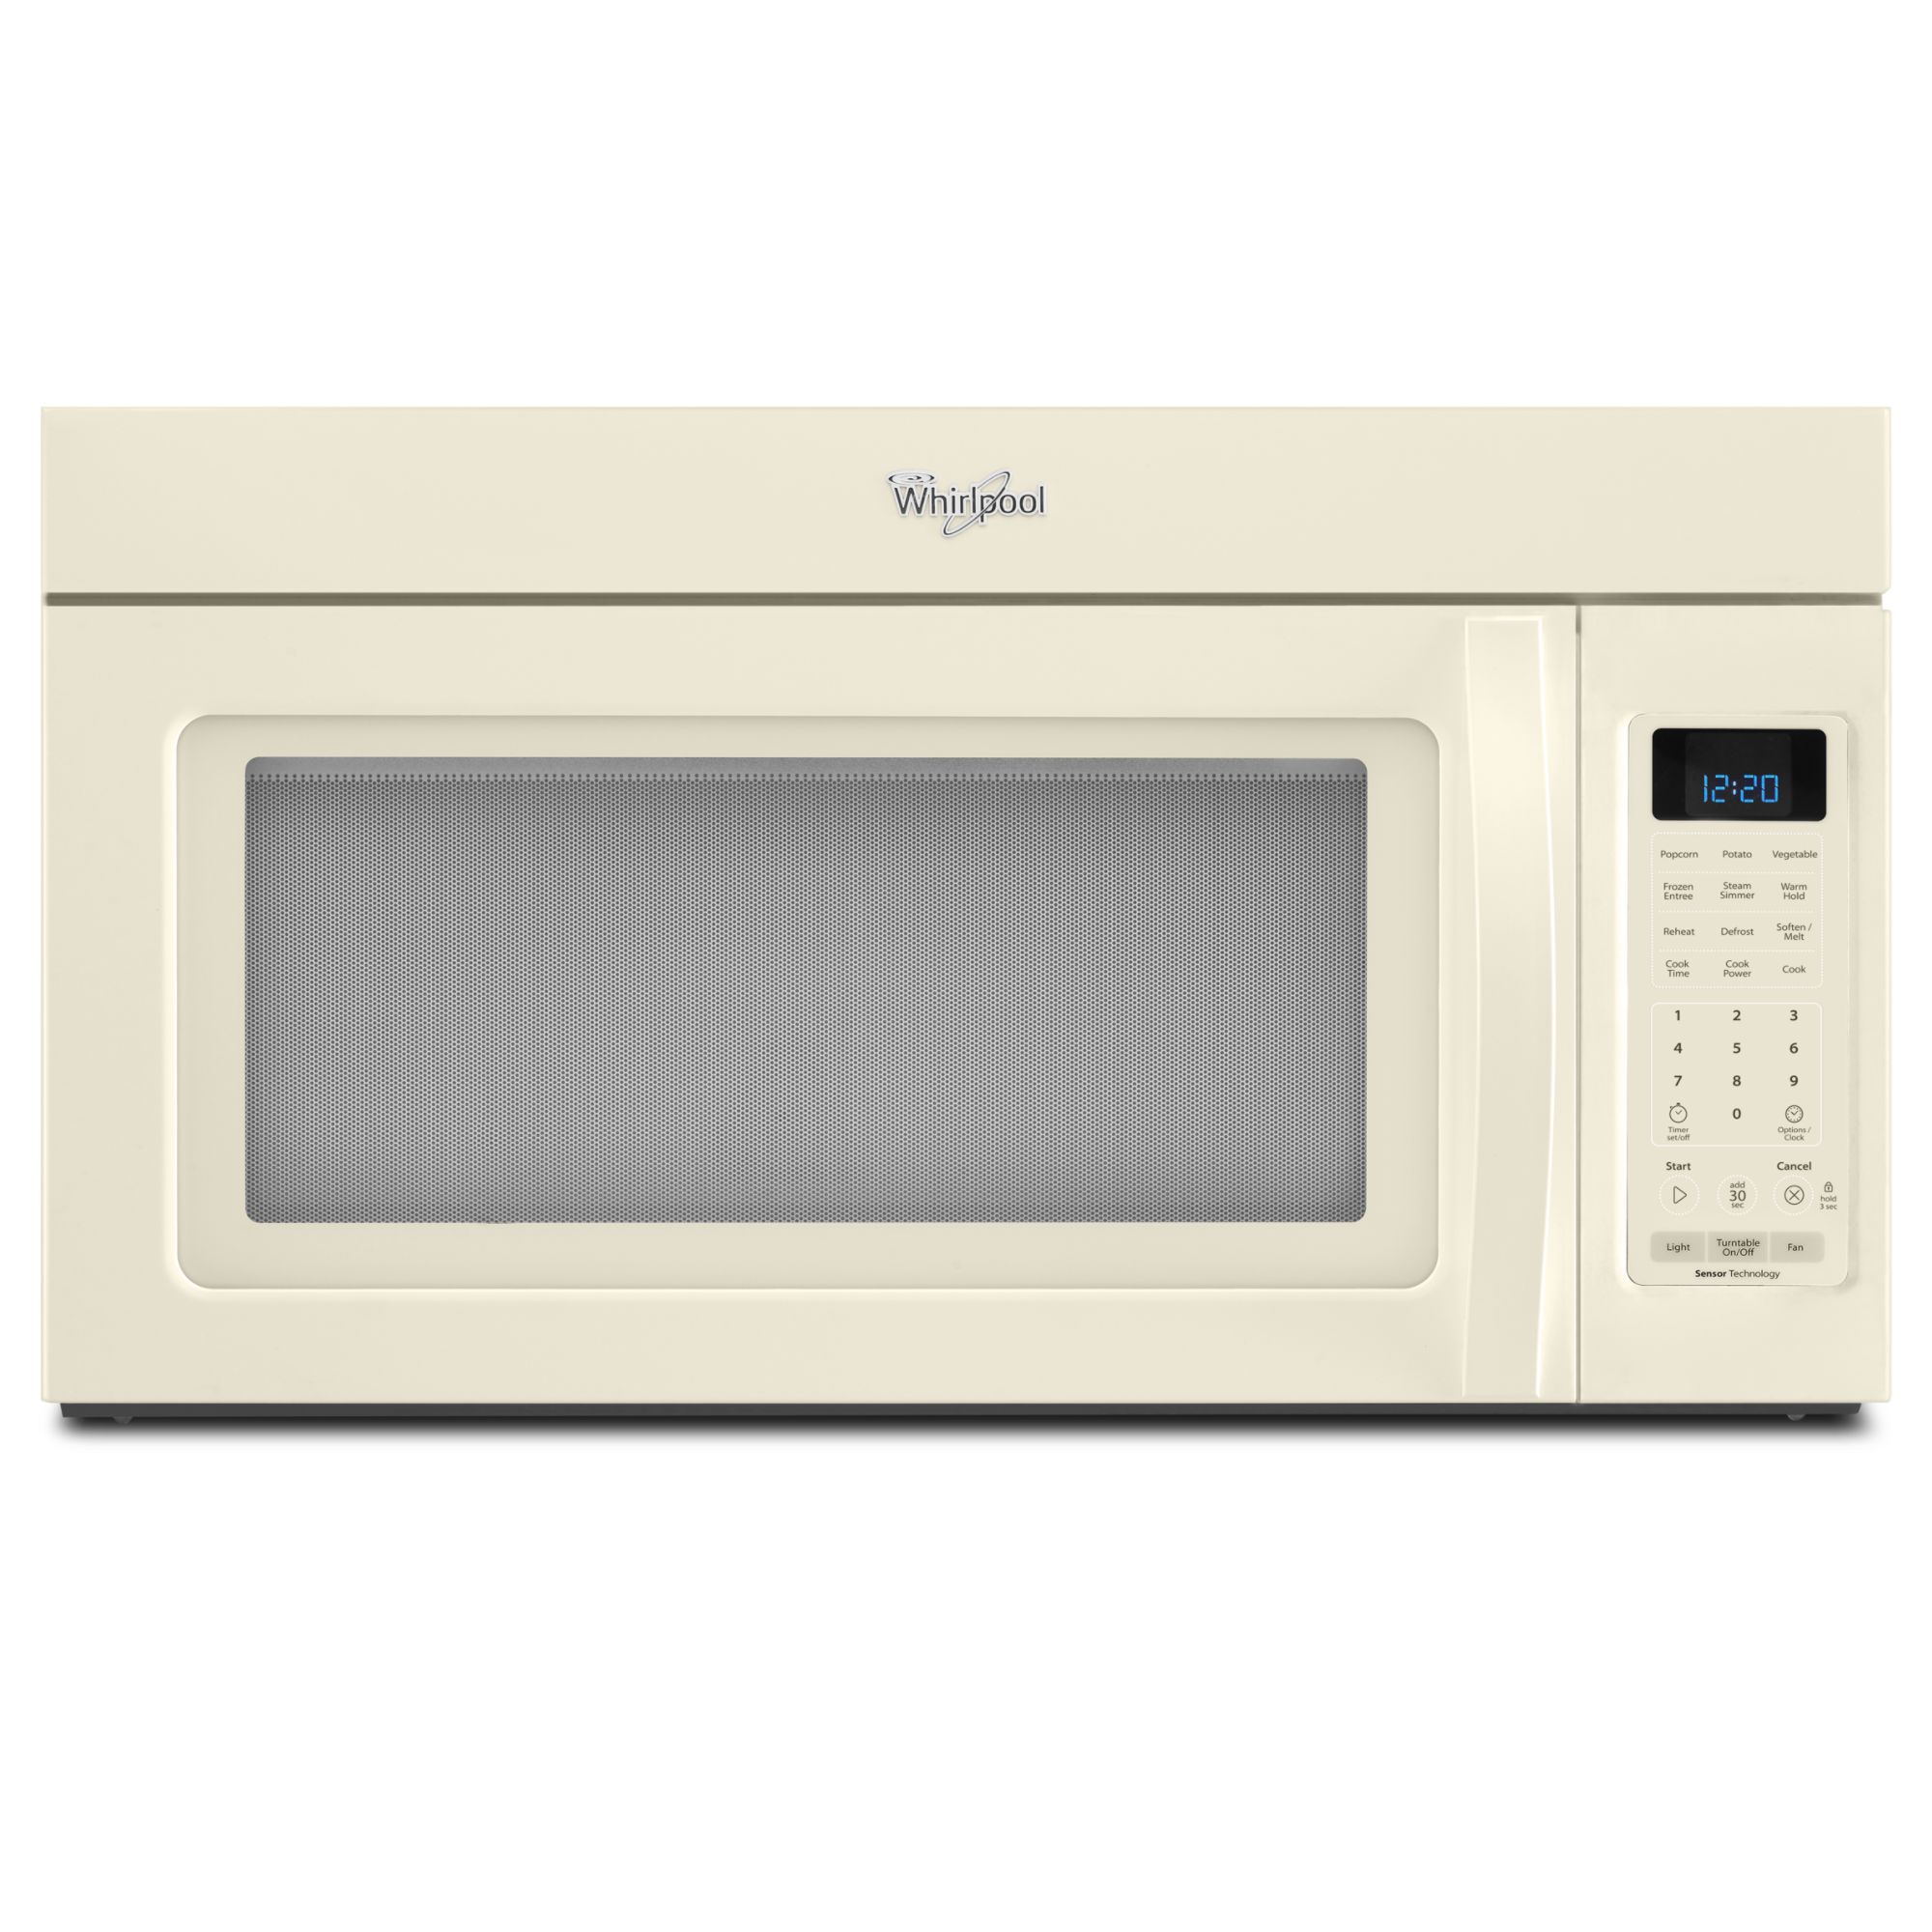 Whirlpool - WMH32517AT - 30 in. Over the Range Microwave w/ Sensor